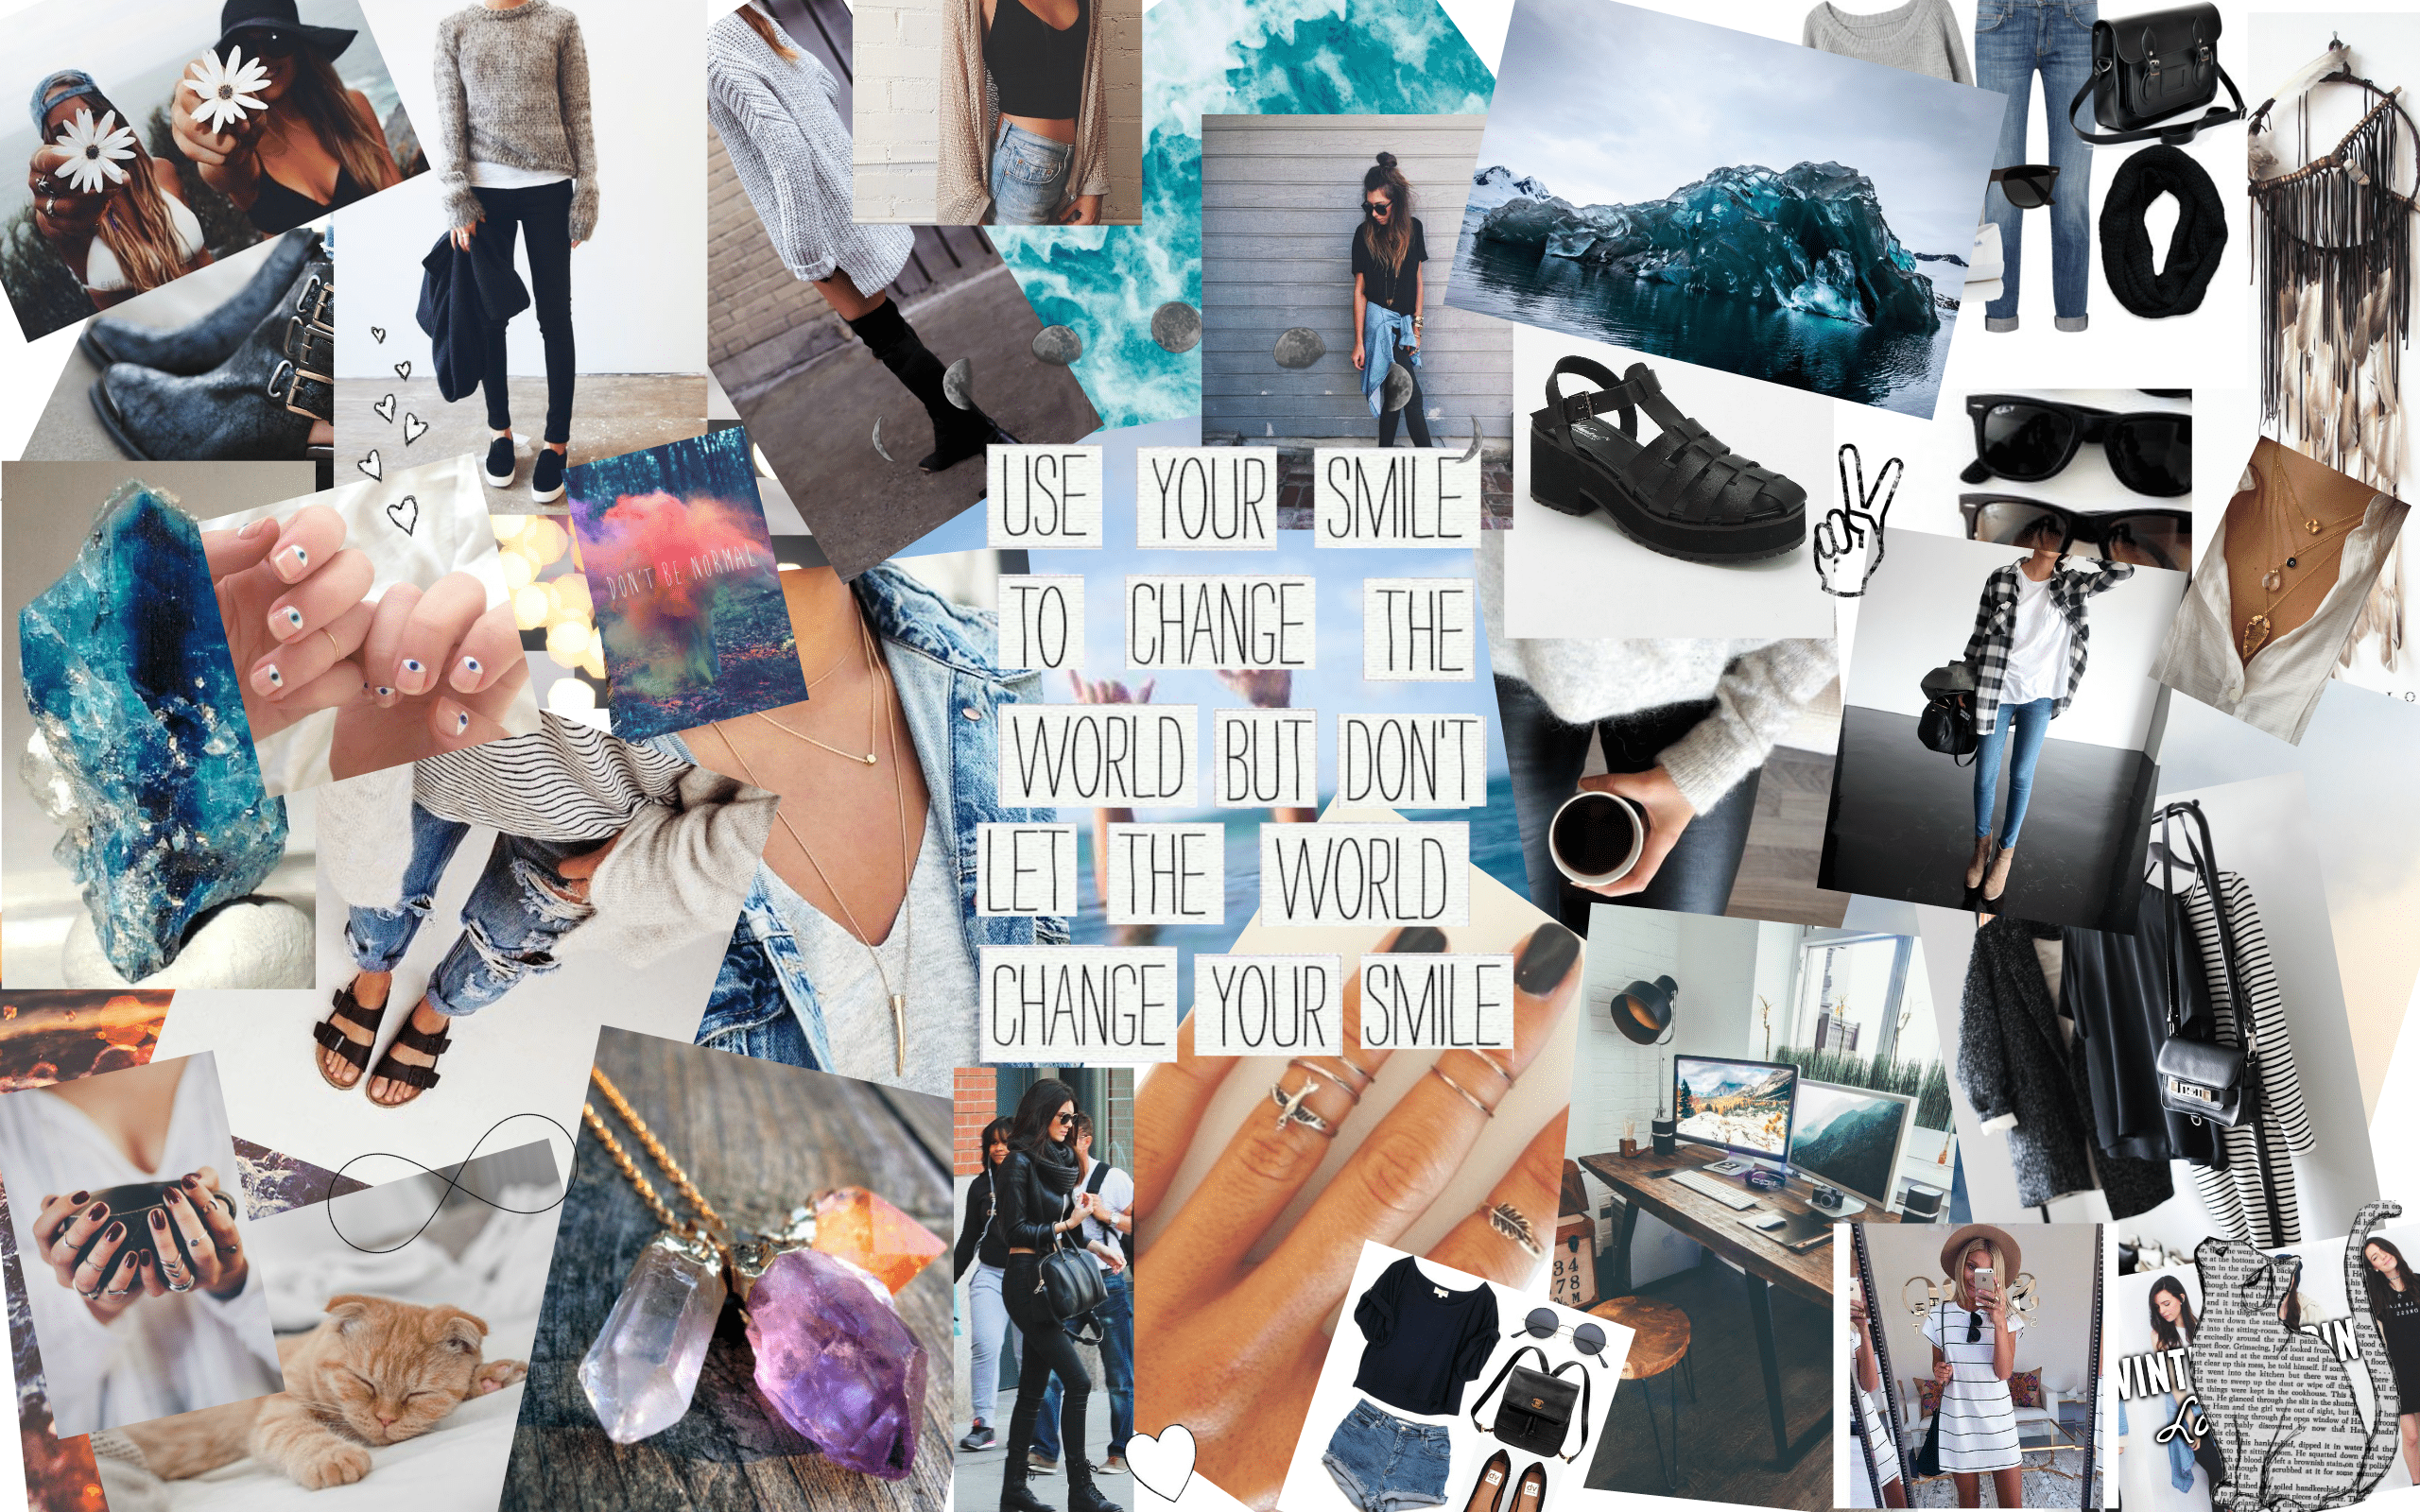 A collage of photos including people, shoes, handbags, and a cat. - Collage